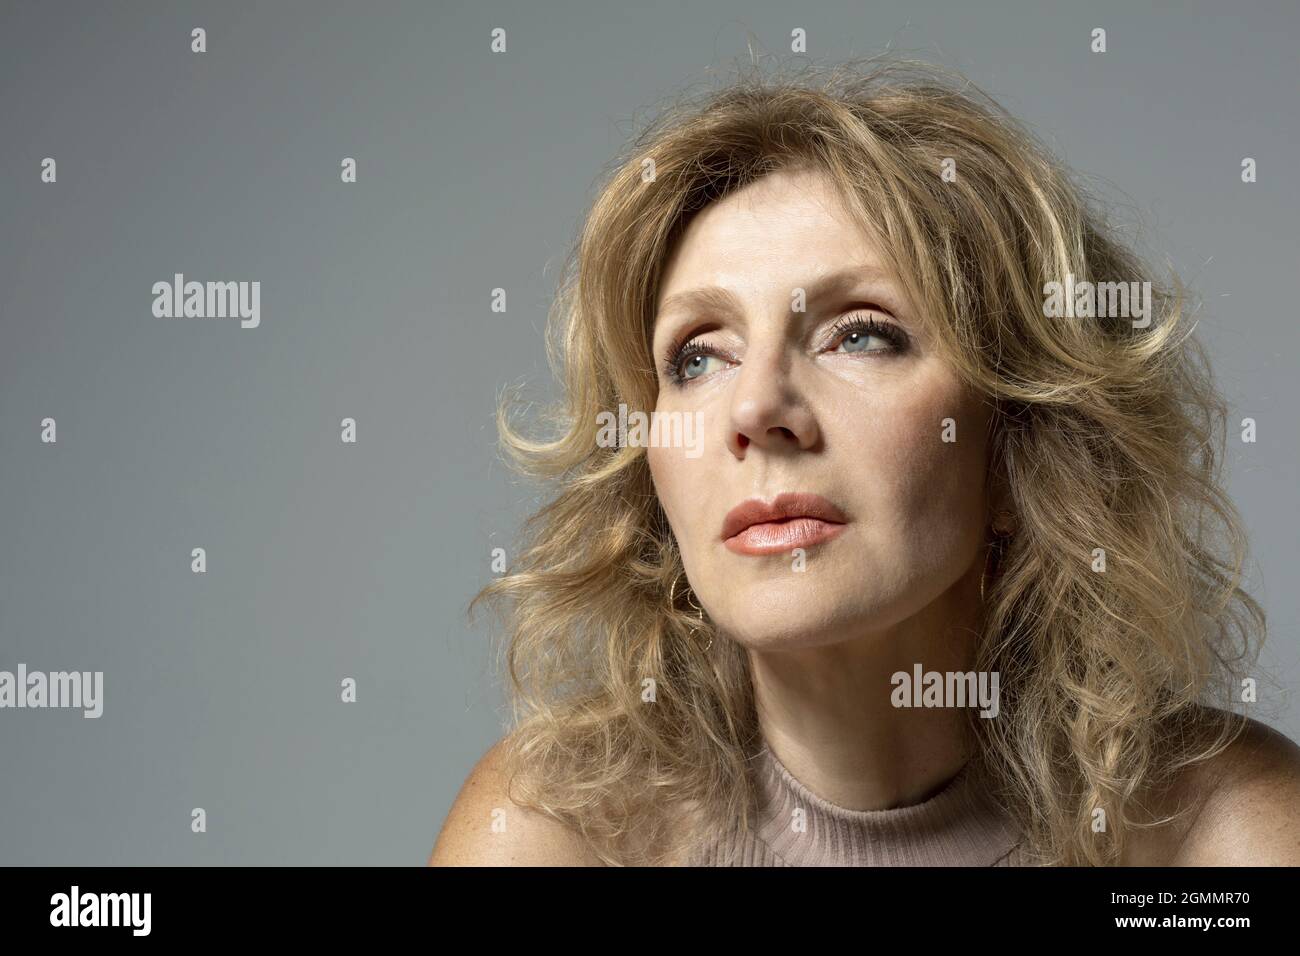 Portrait thoughtful woman looking away on gray background Stock Photo